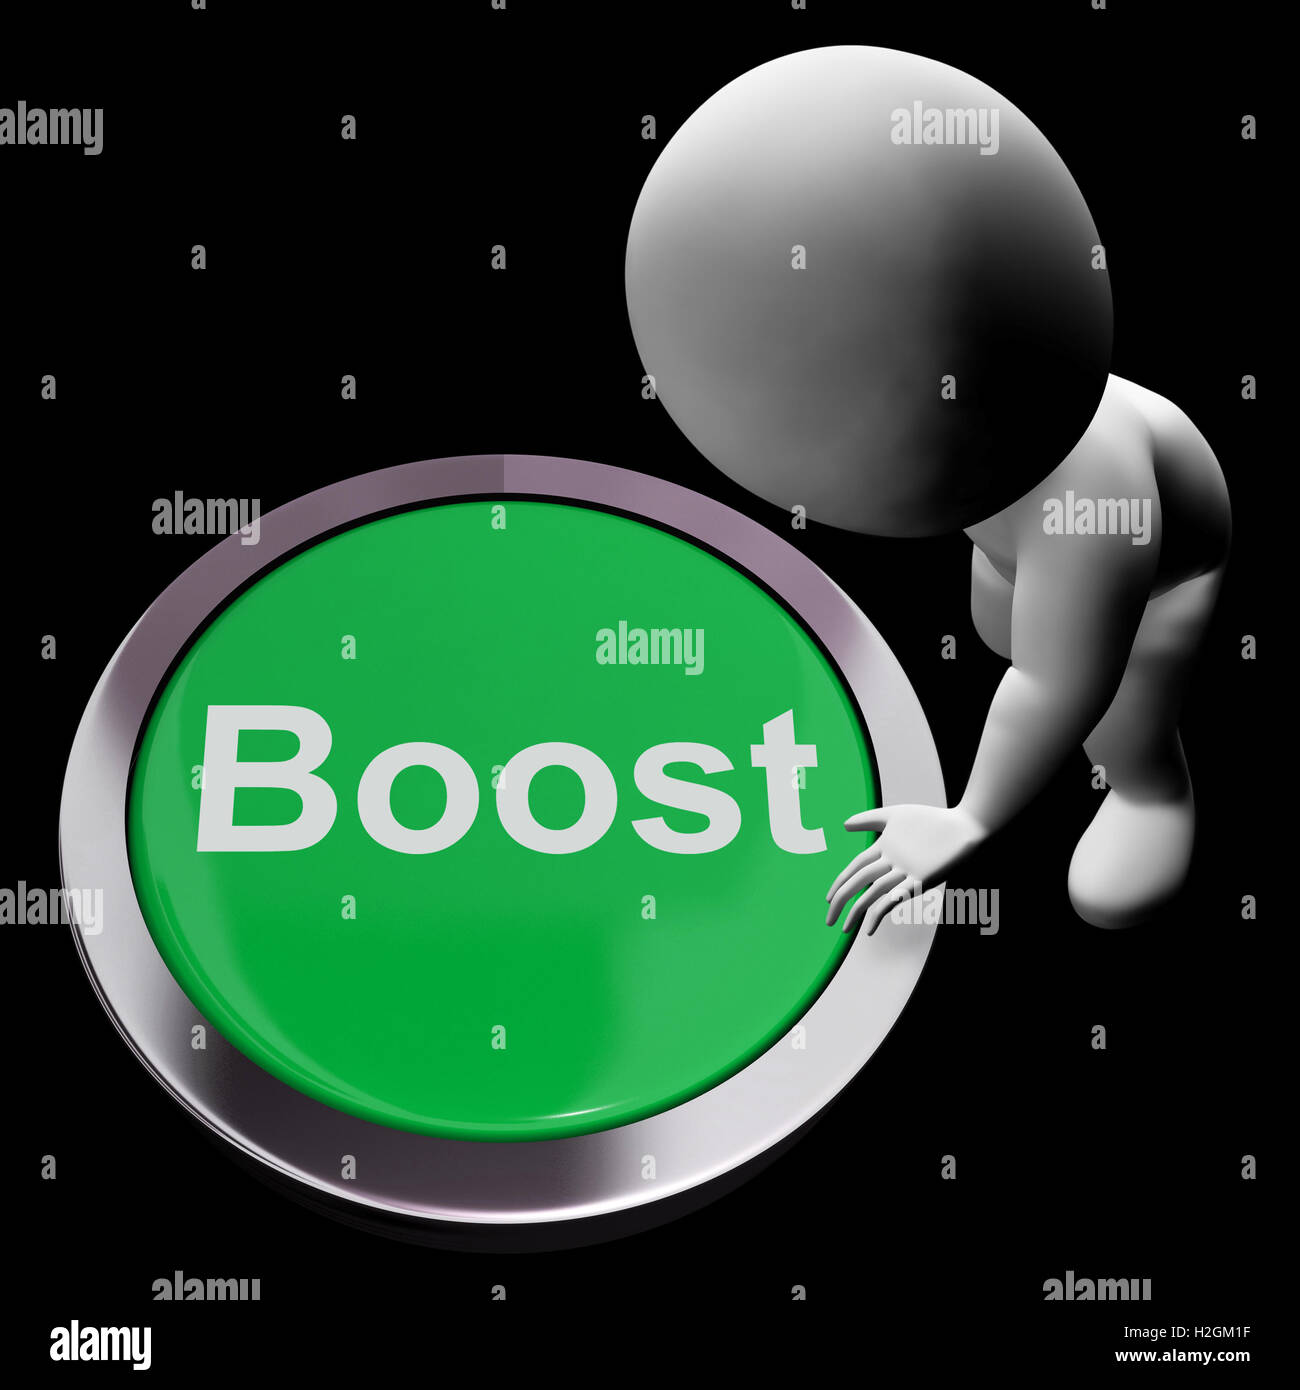 Boost Button Means Improvement Upgrade Or Expansion Stock Photo